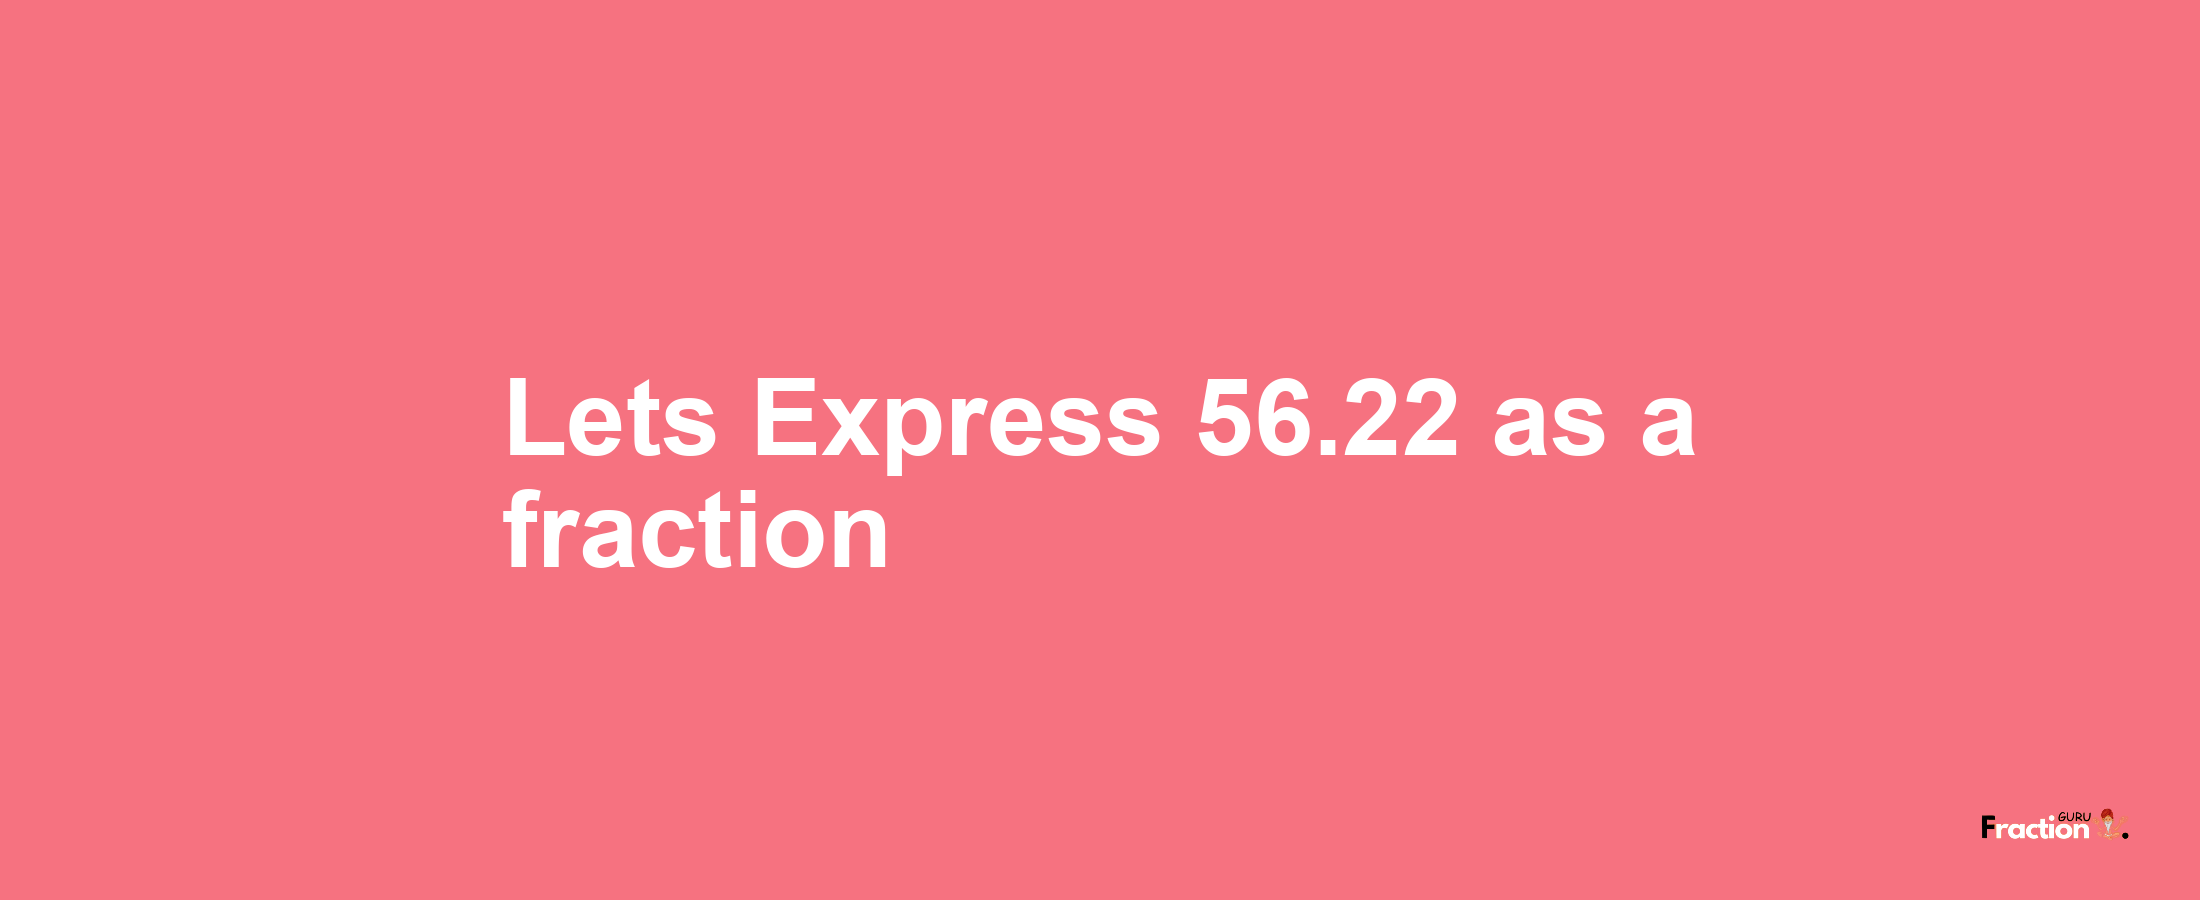 Lets Express 56.22 as afraction